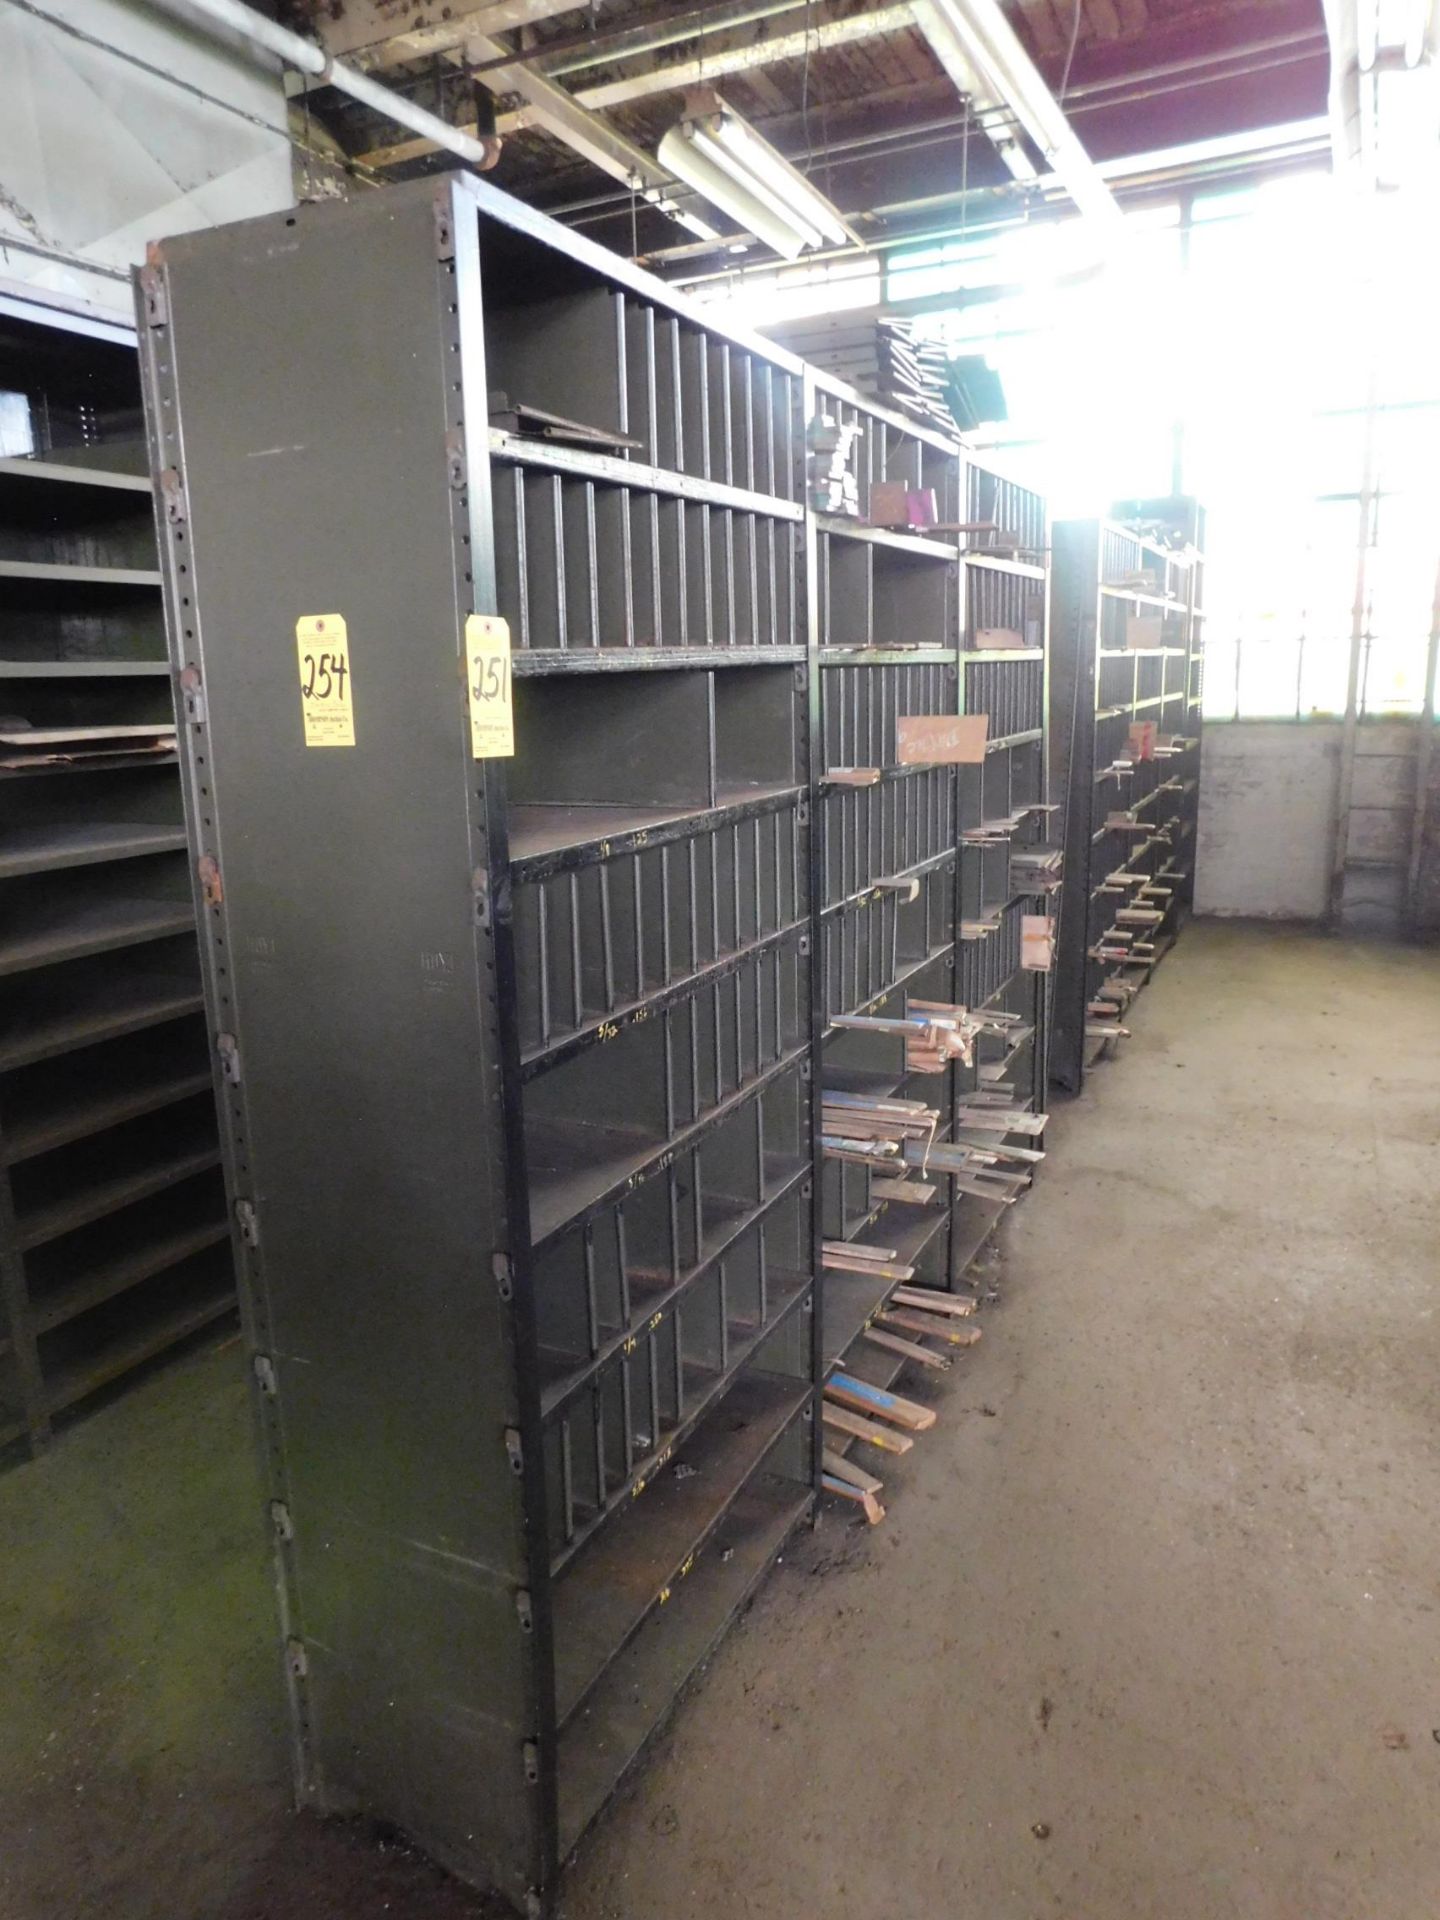 (7) Sections of Metal Shelving, No Contents